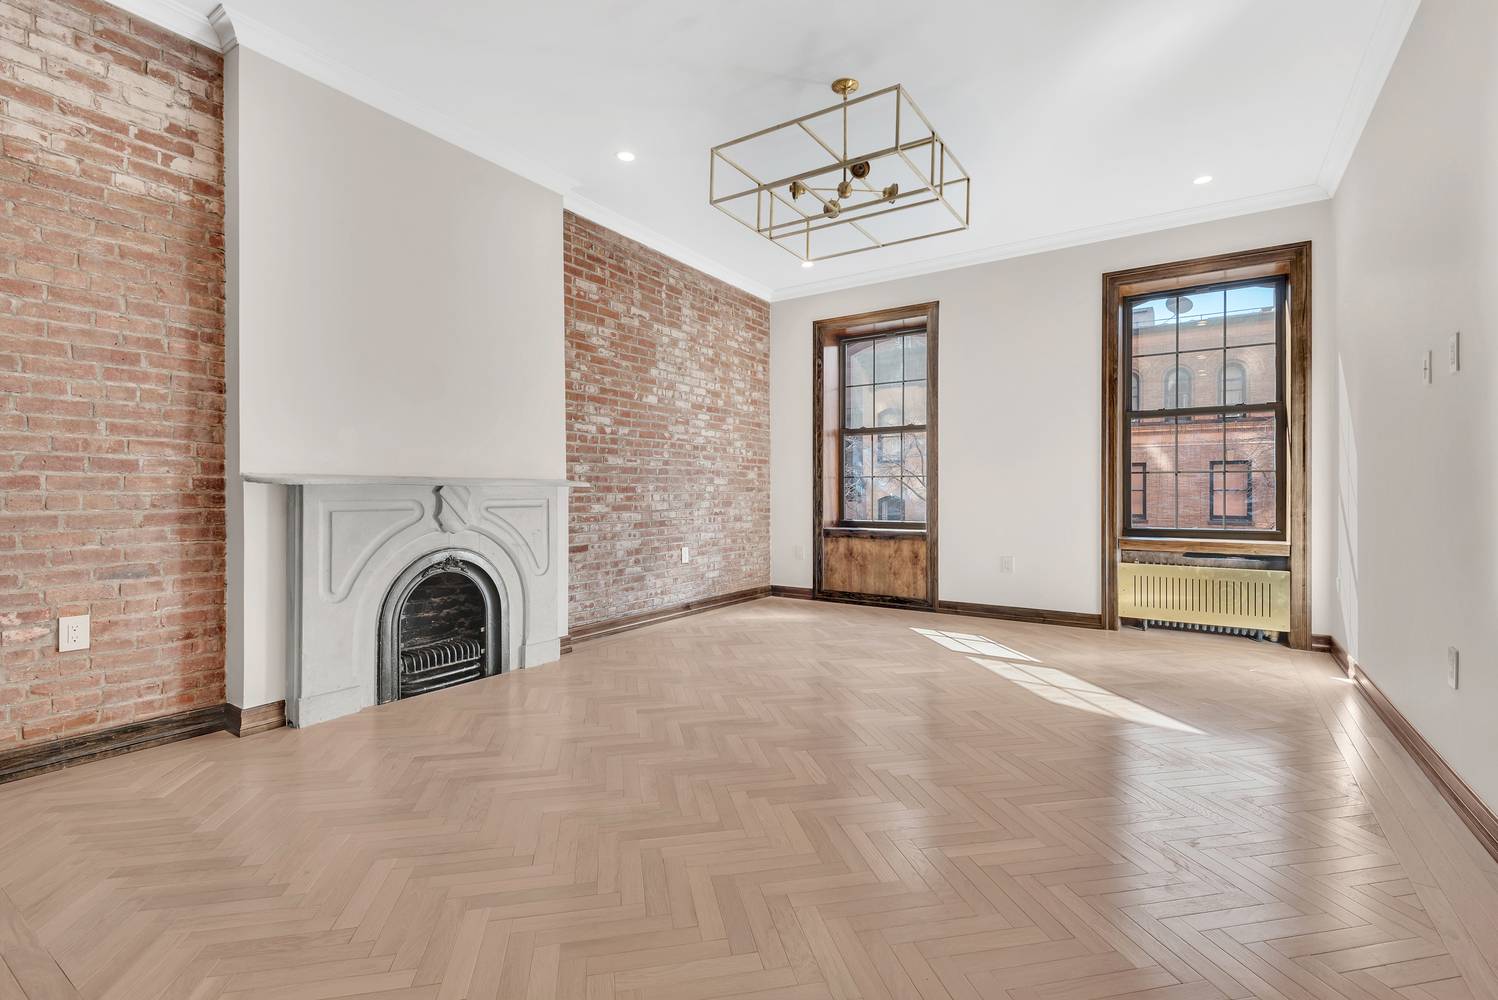 Luxury one bedroom, furnished or unfurnished, available in a beautiful 25 ft wide elevator brownstone.